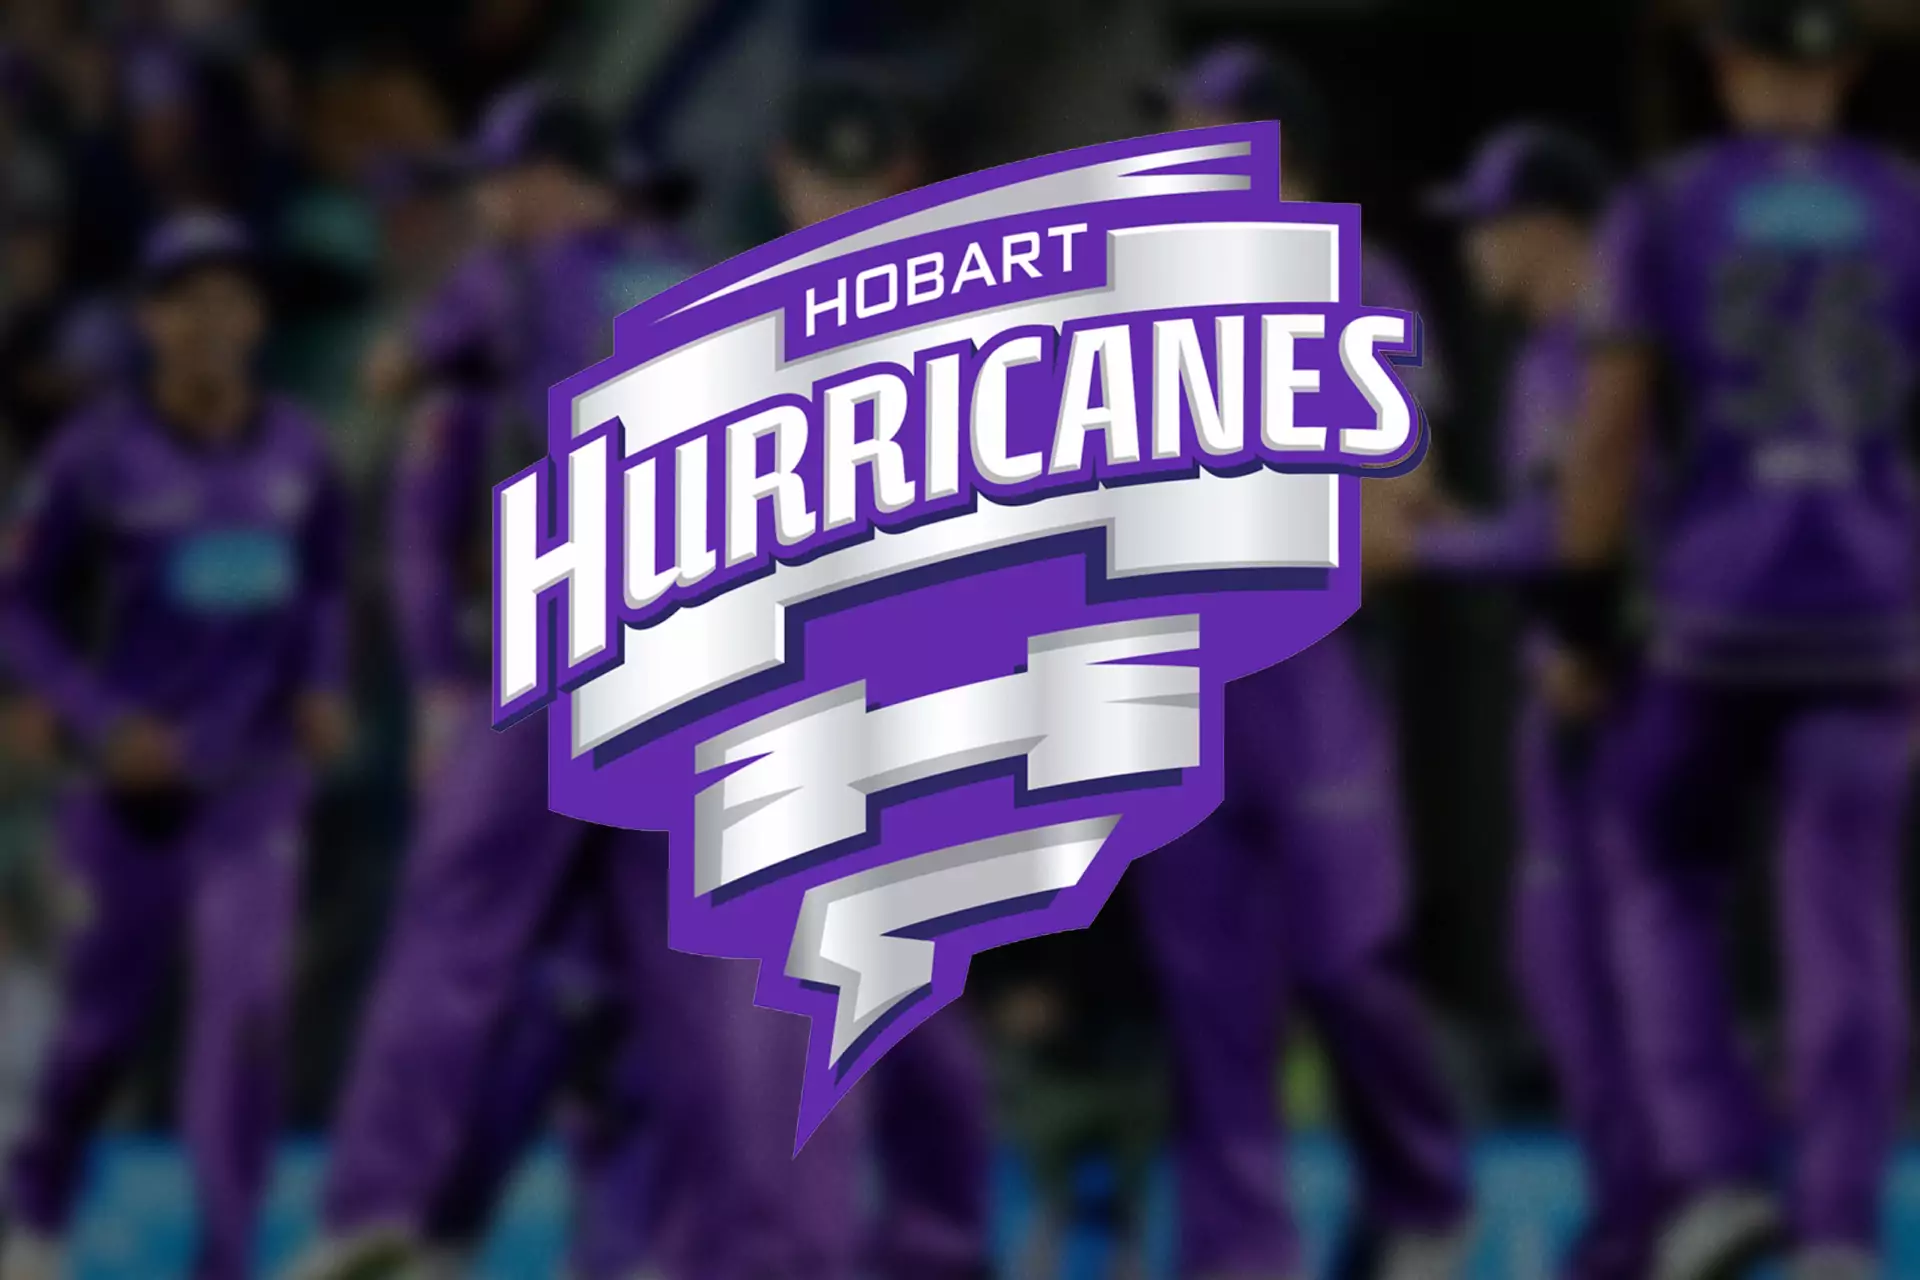 The Hobart Hurricanes team hasn't been a winner of BBL yet but reached the final twice.